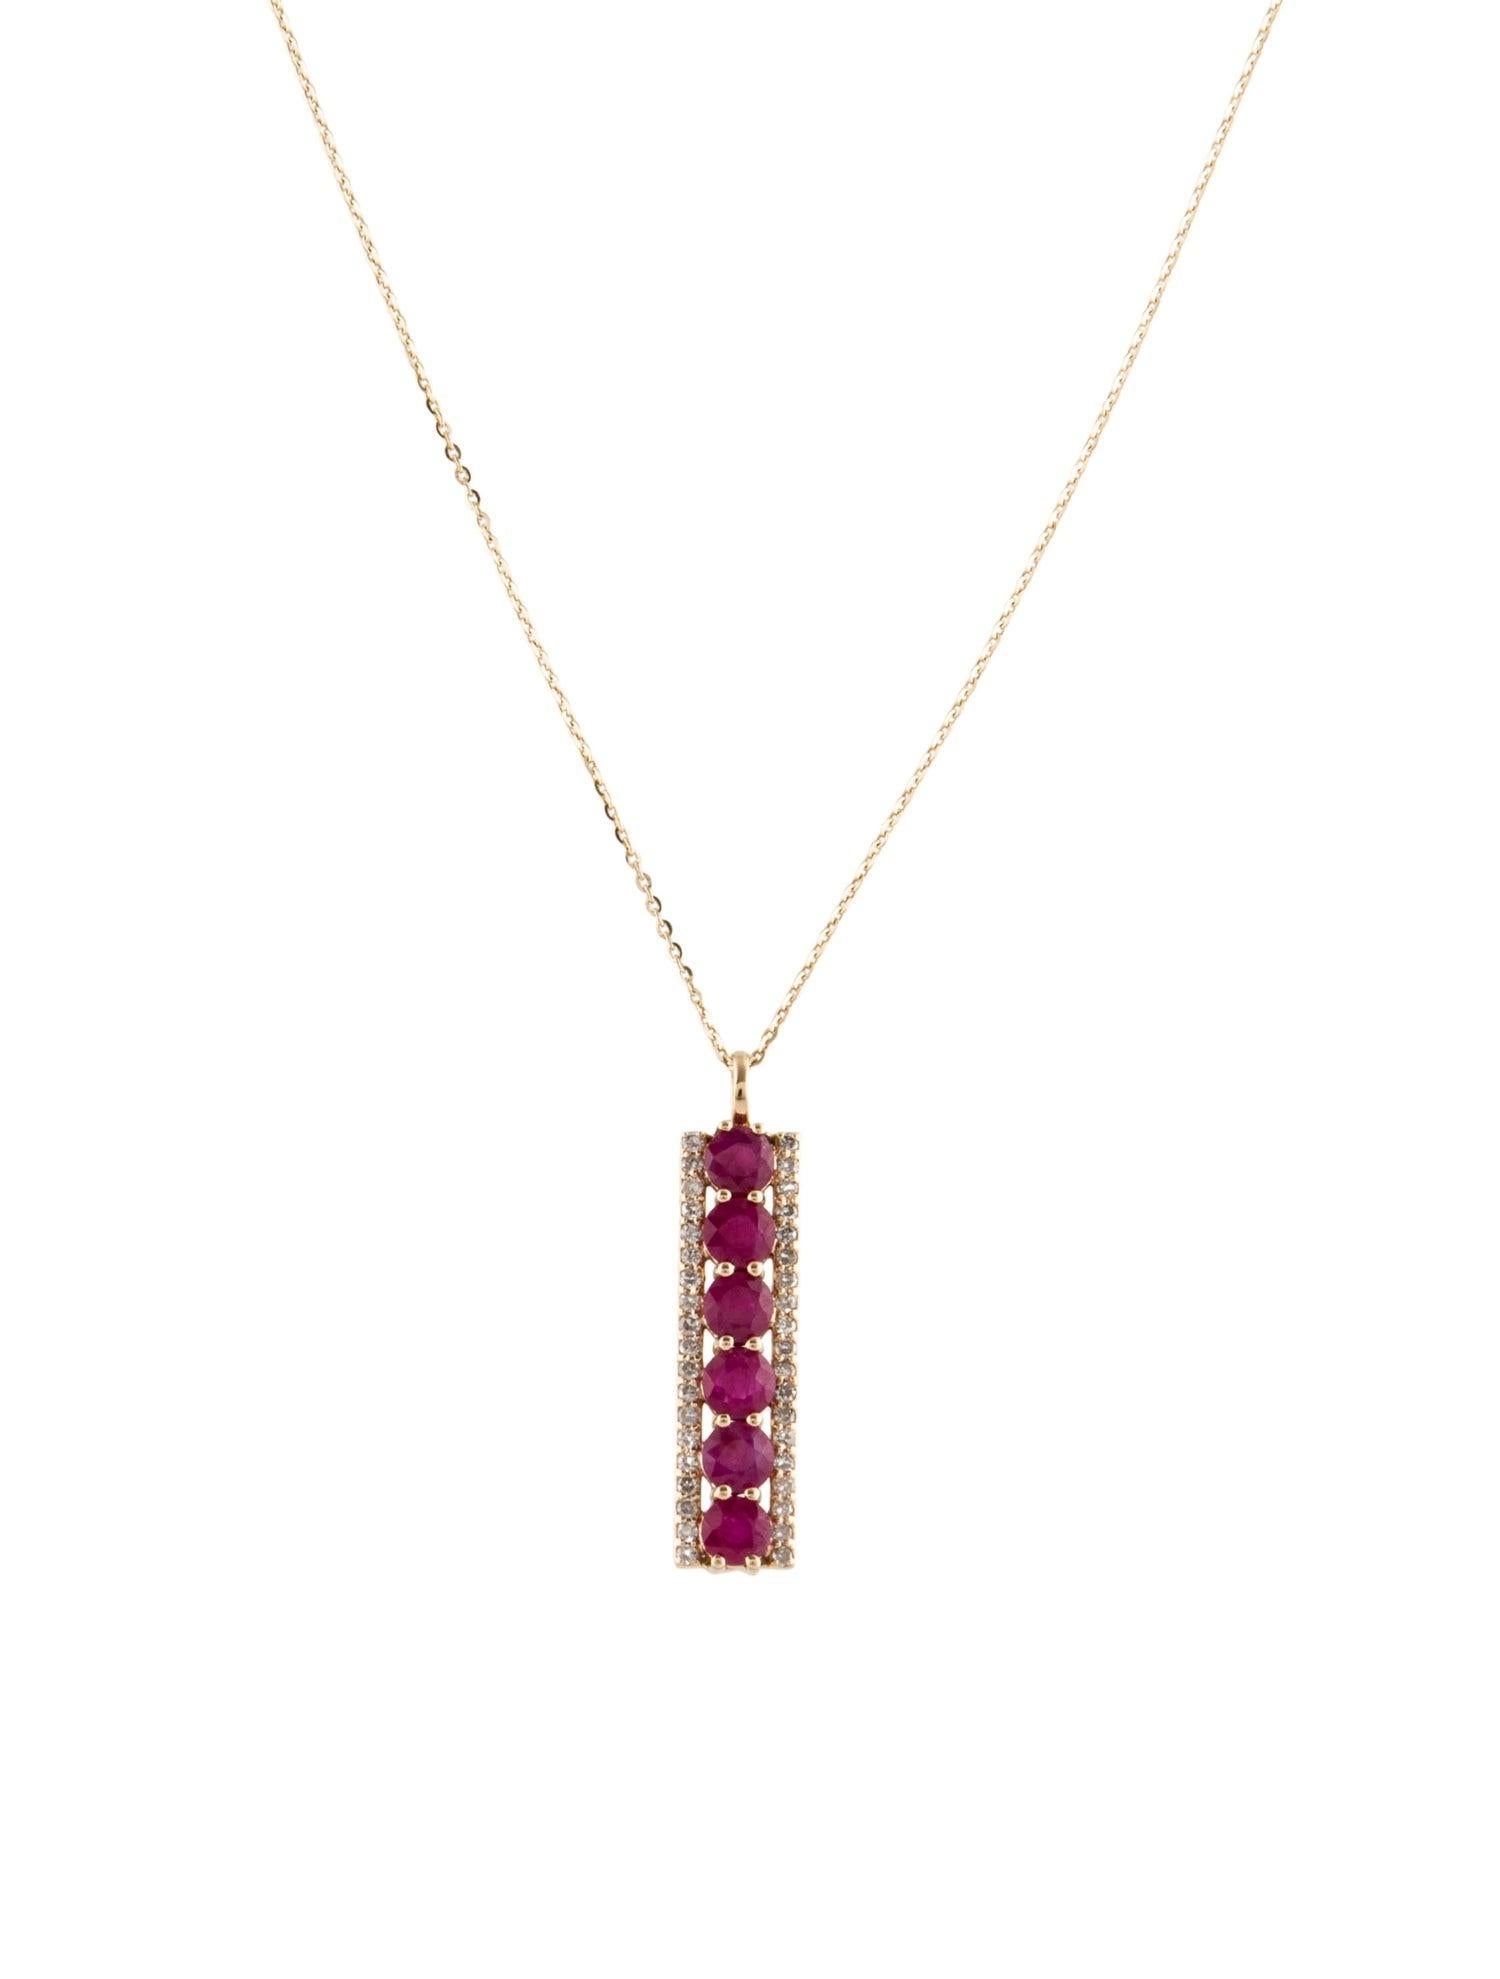 14K Ruby & Diamond Pendant Necklace: Timeless Elegance, Luxury Statement Jewelry In New Condition For Sale In Holtsville, NY